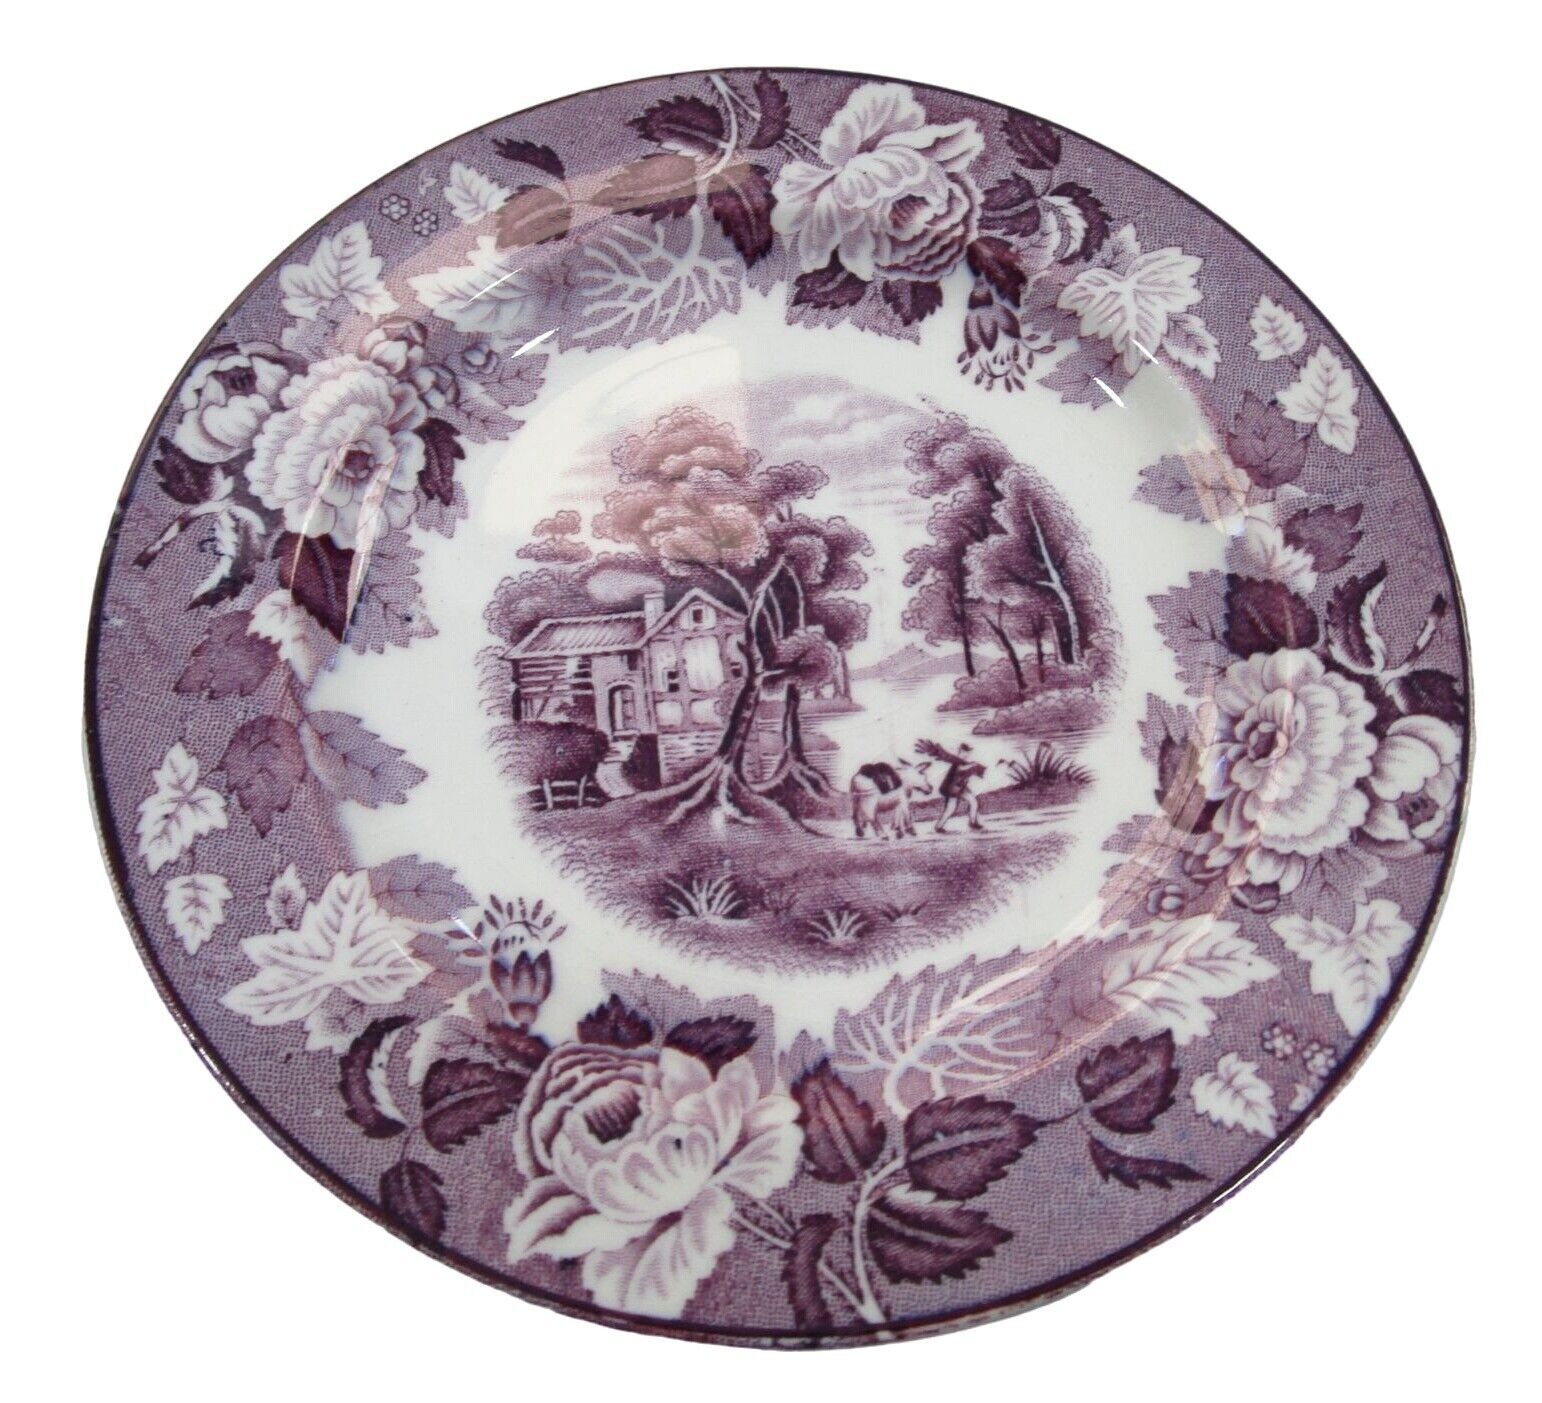 Woods Ware English Scenery Purple Pastoral Floral Bread Butter Plate GUC 1917